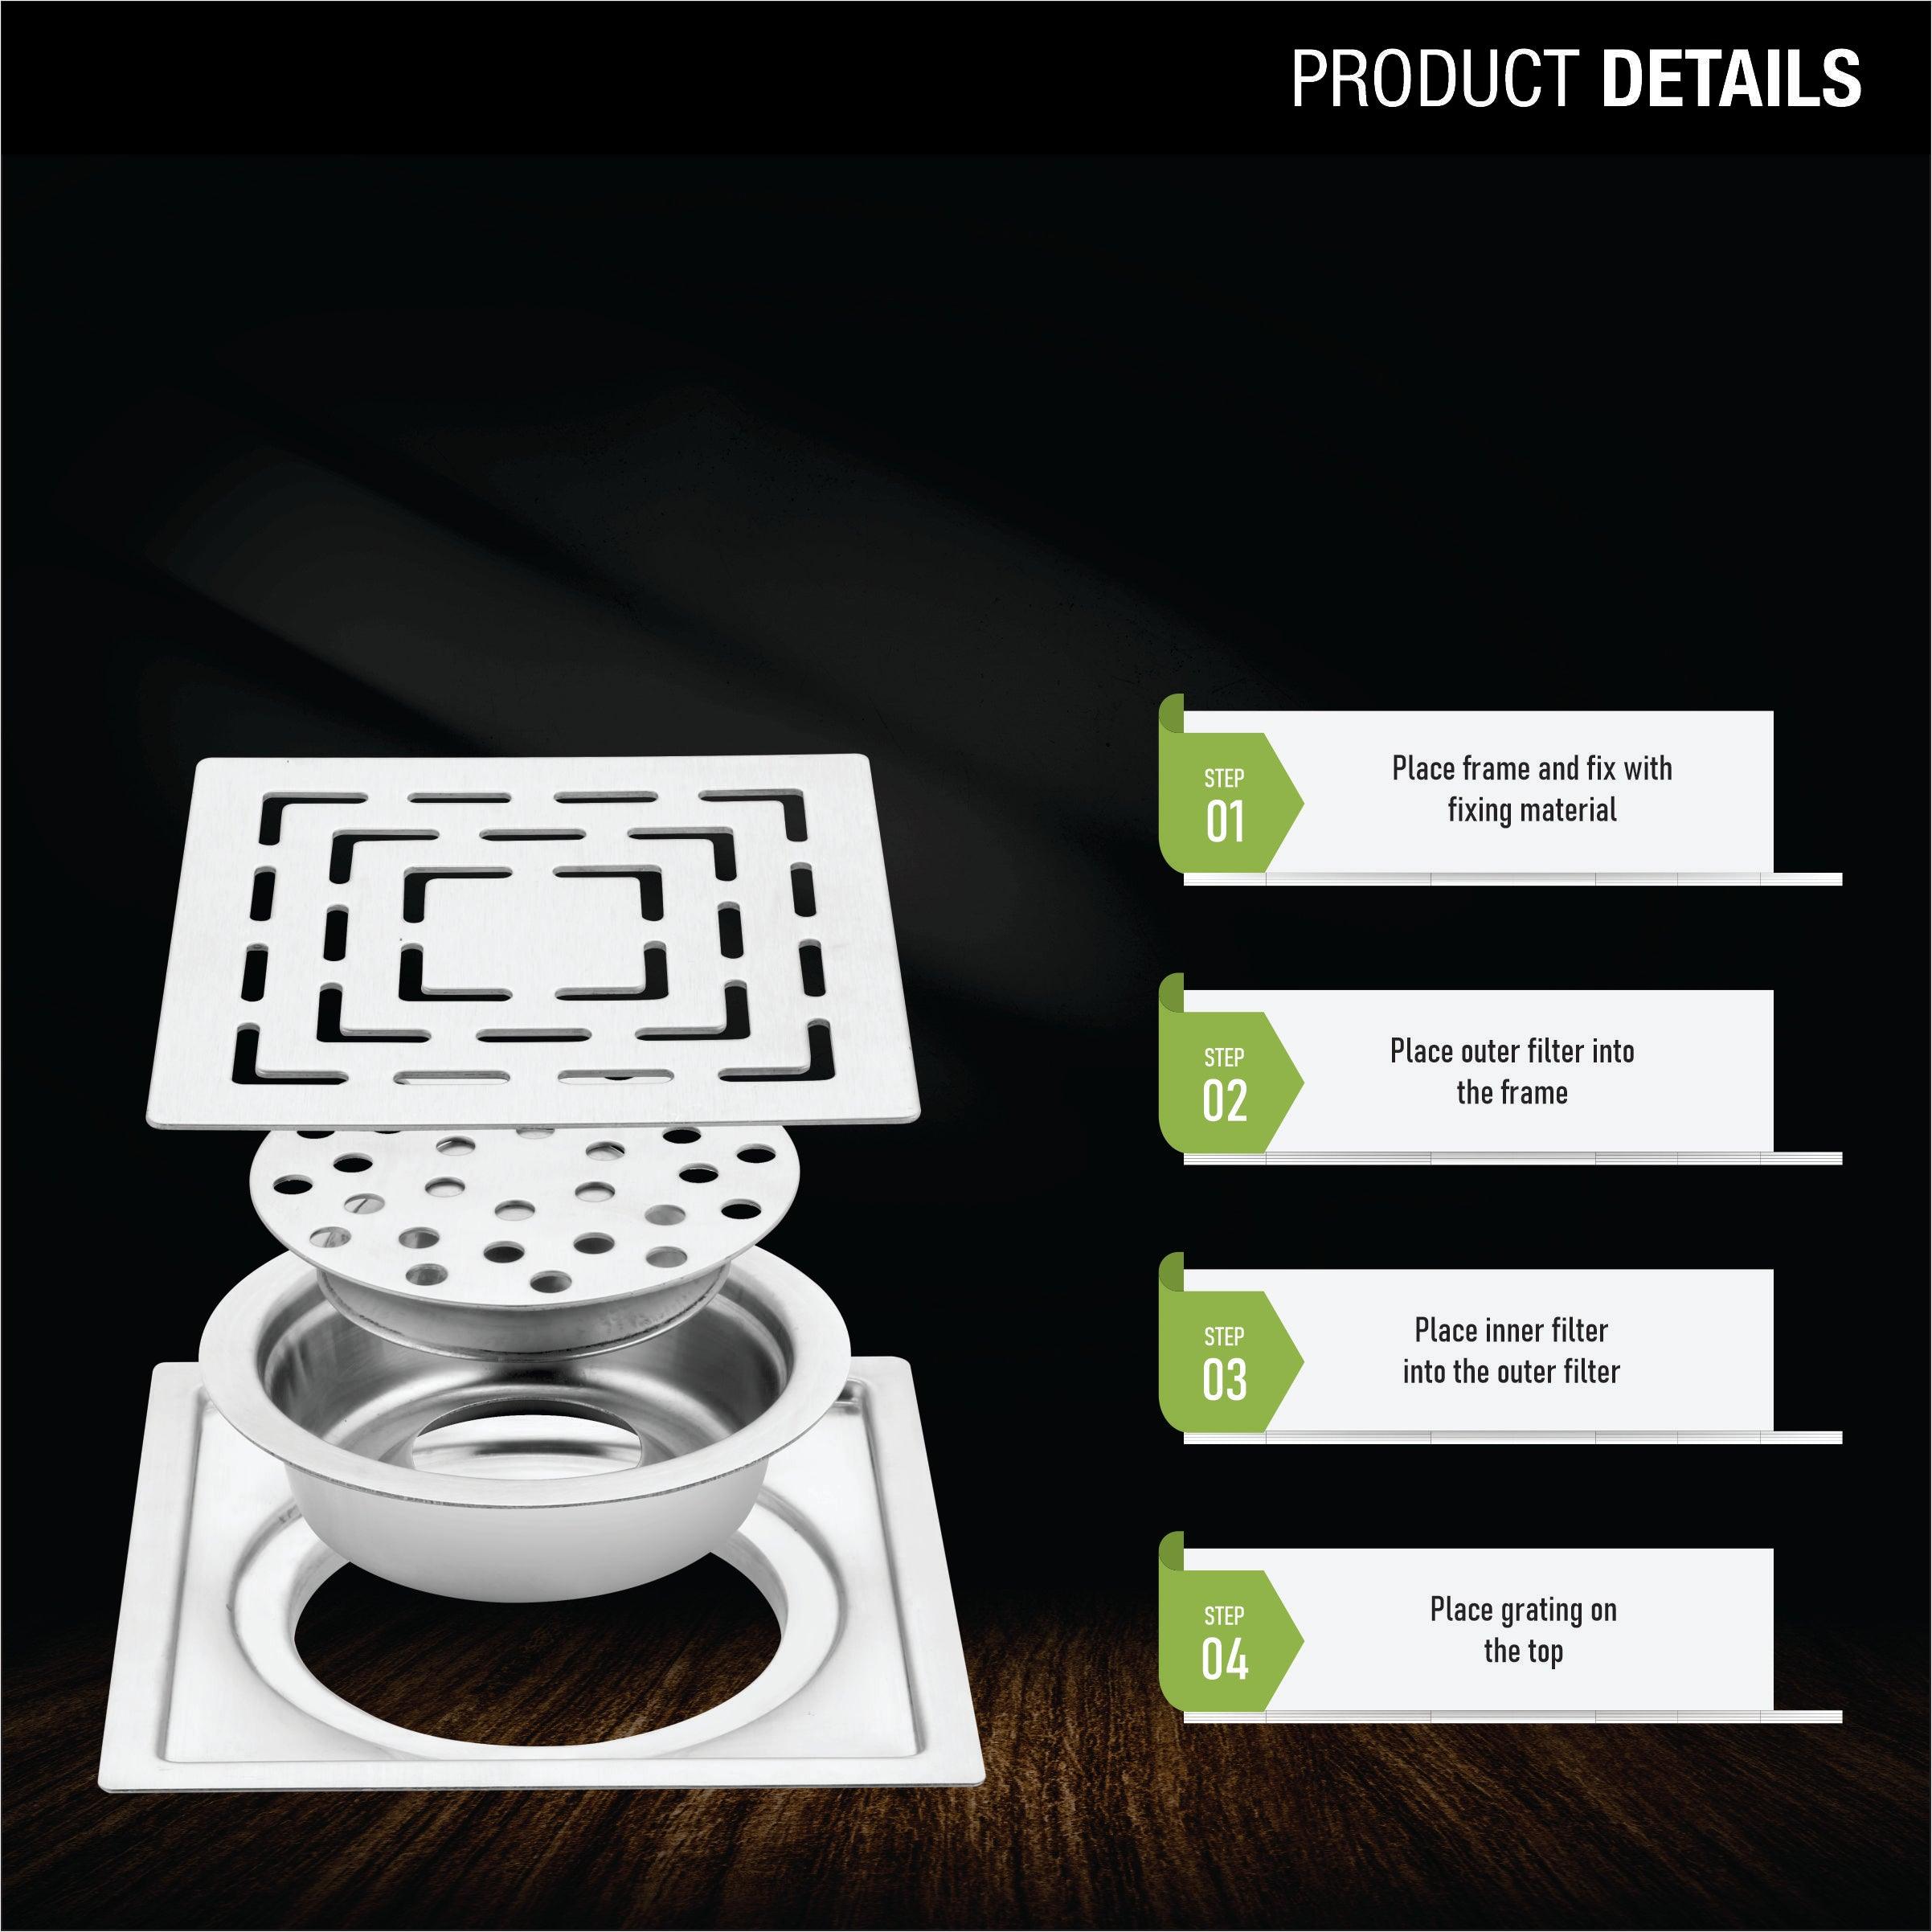 Orange Exclusive Square Flat Cut Floor Drain (5 x 5 Inches) with Cockroach Trap product details